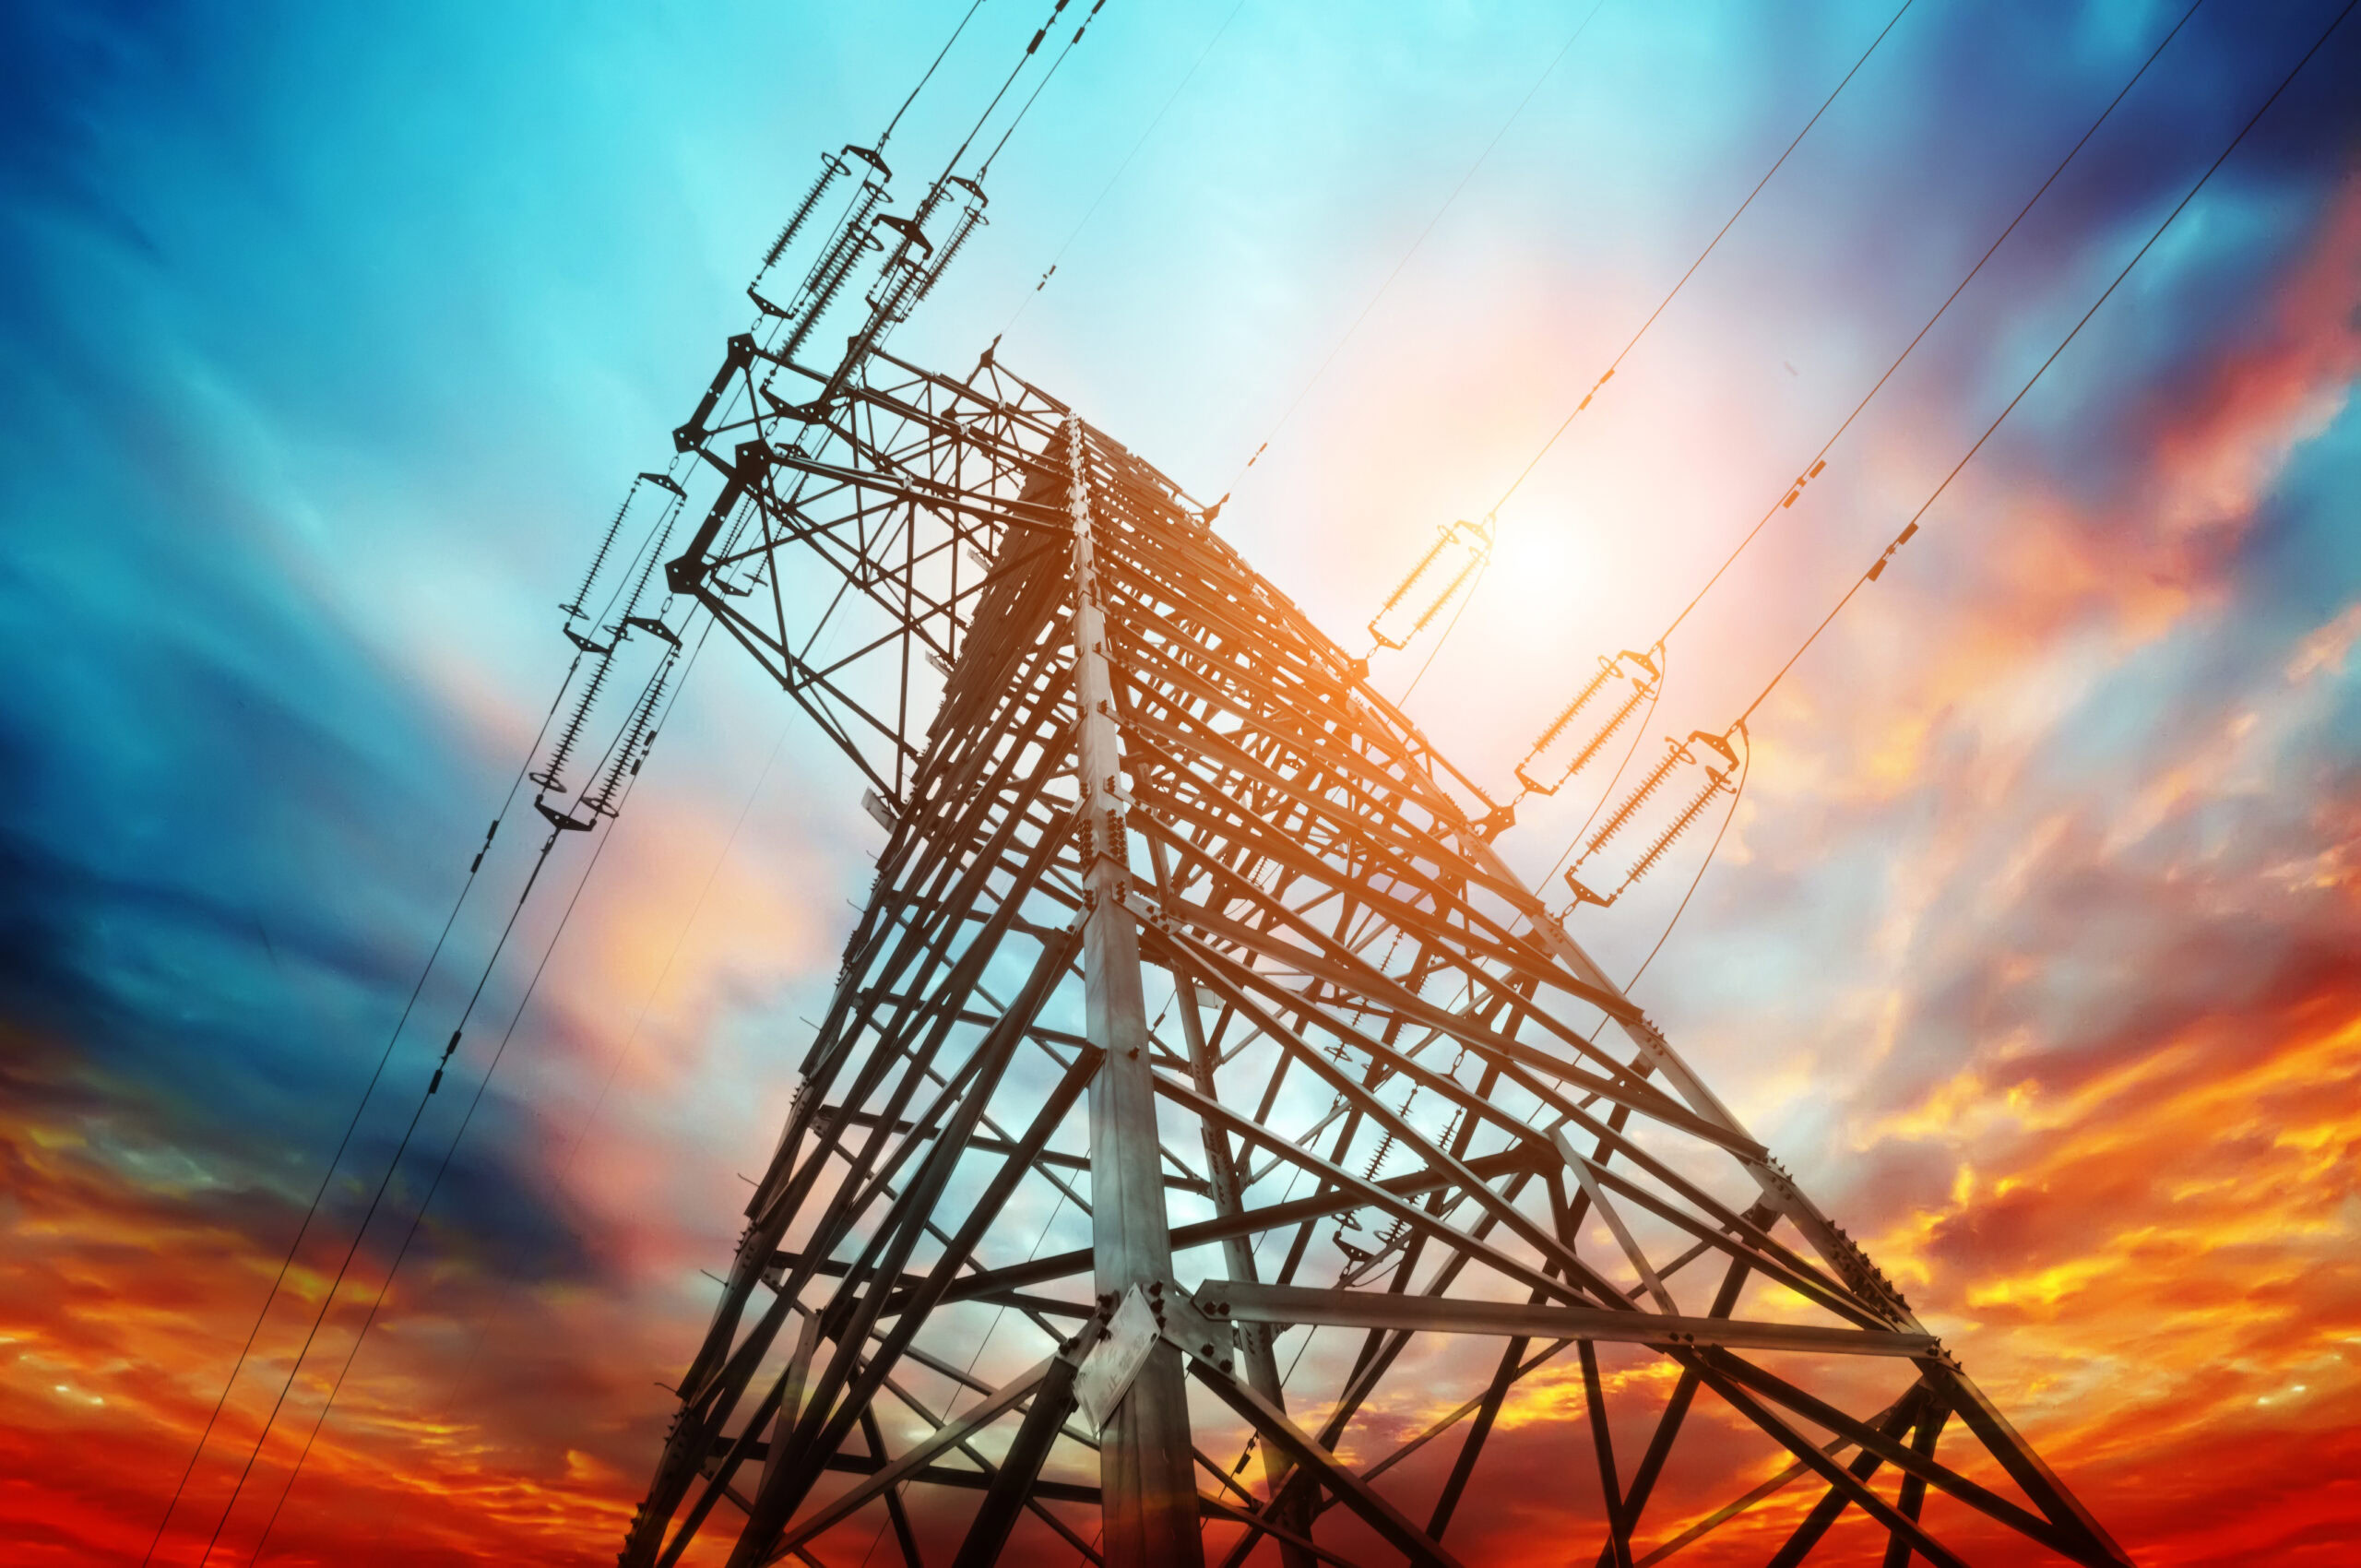 A tall metal electricity transmission tower extends into a colorful sky at sunrise or sunset, embodying the spirit of our Energy Edition, with power lines stretching outward.